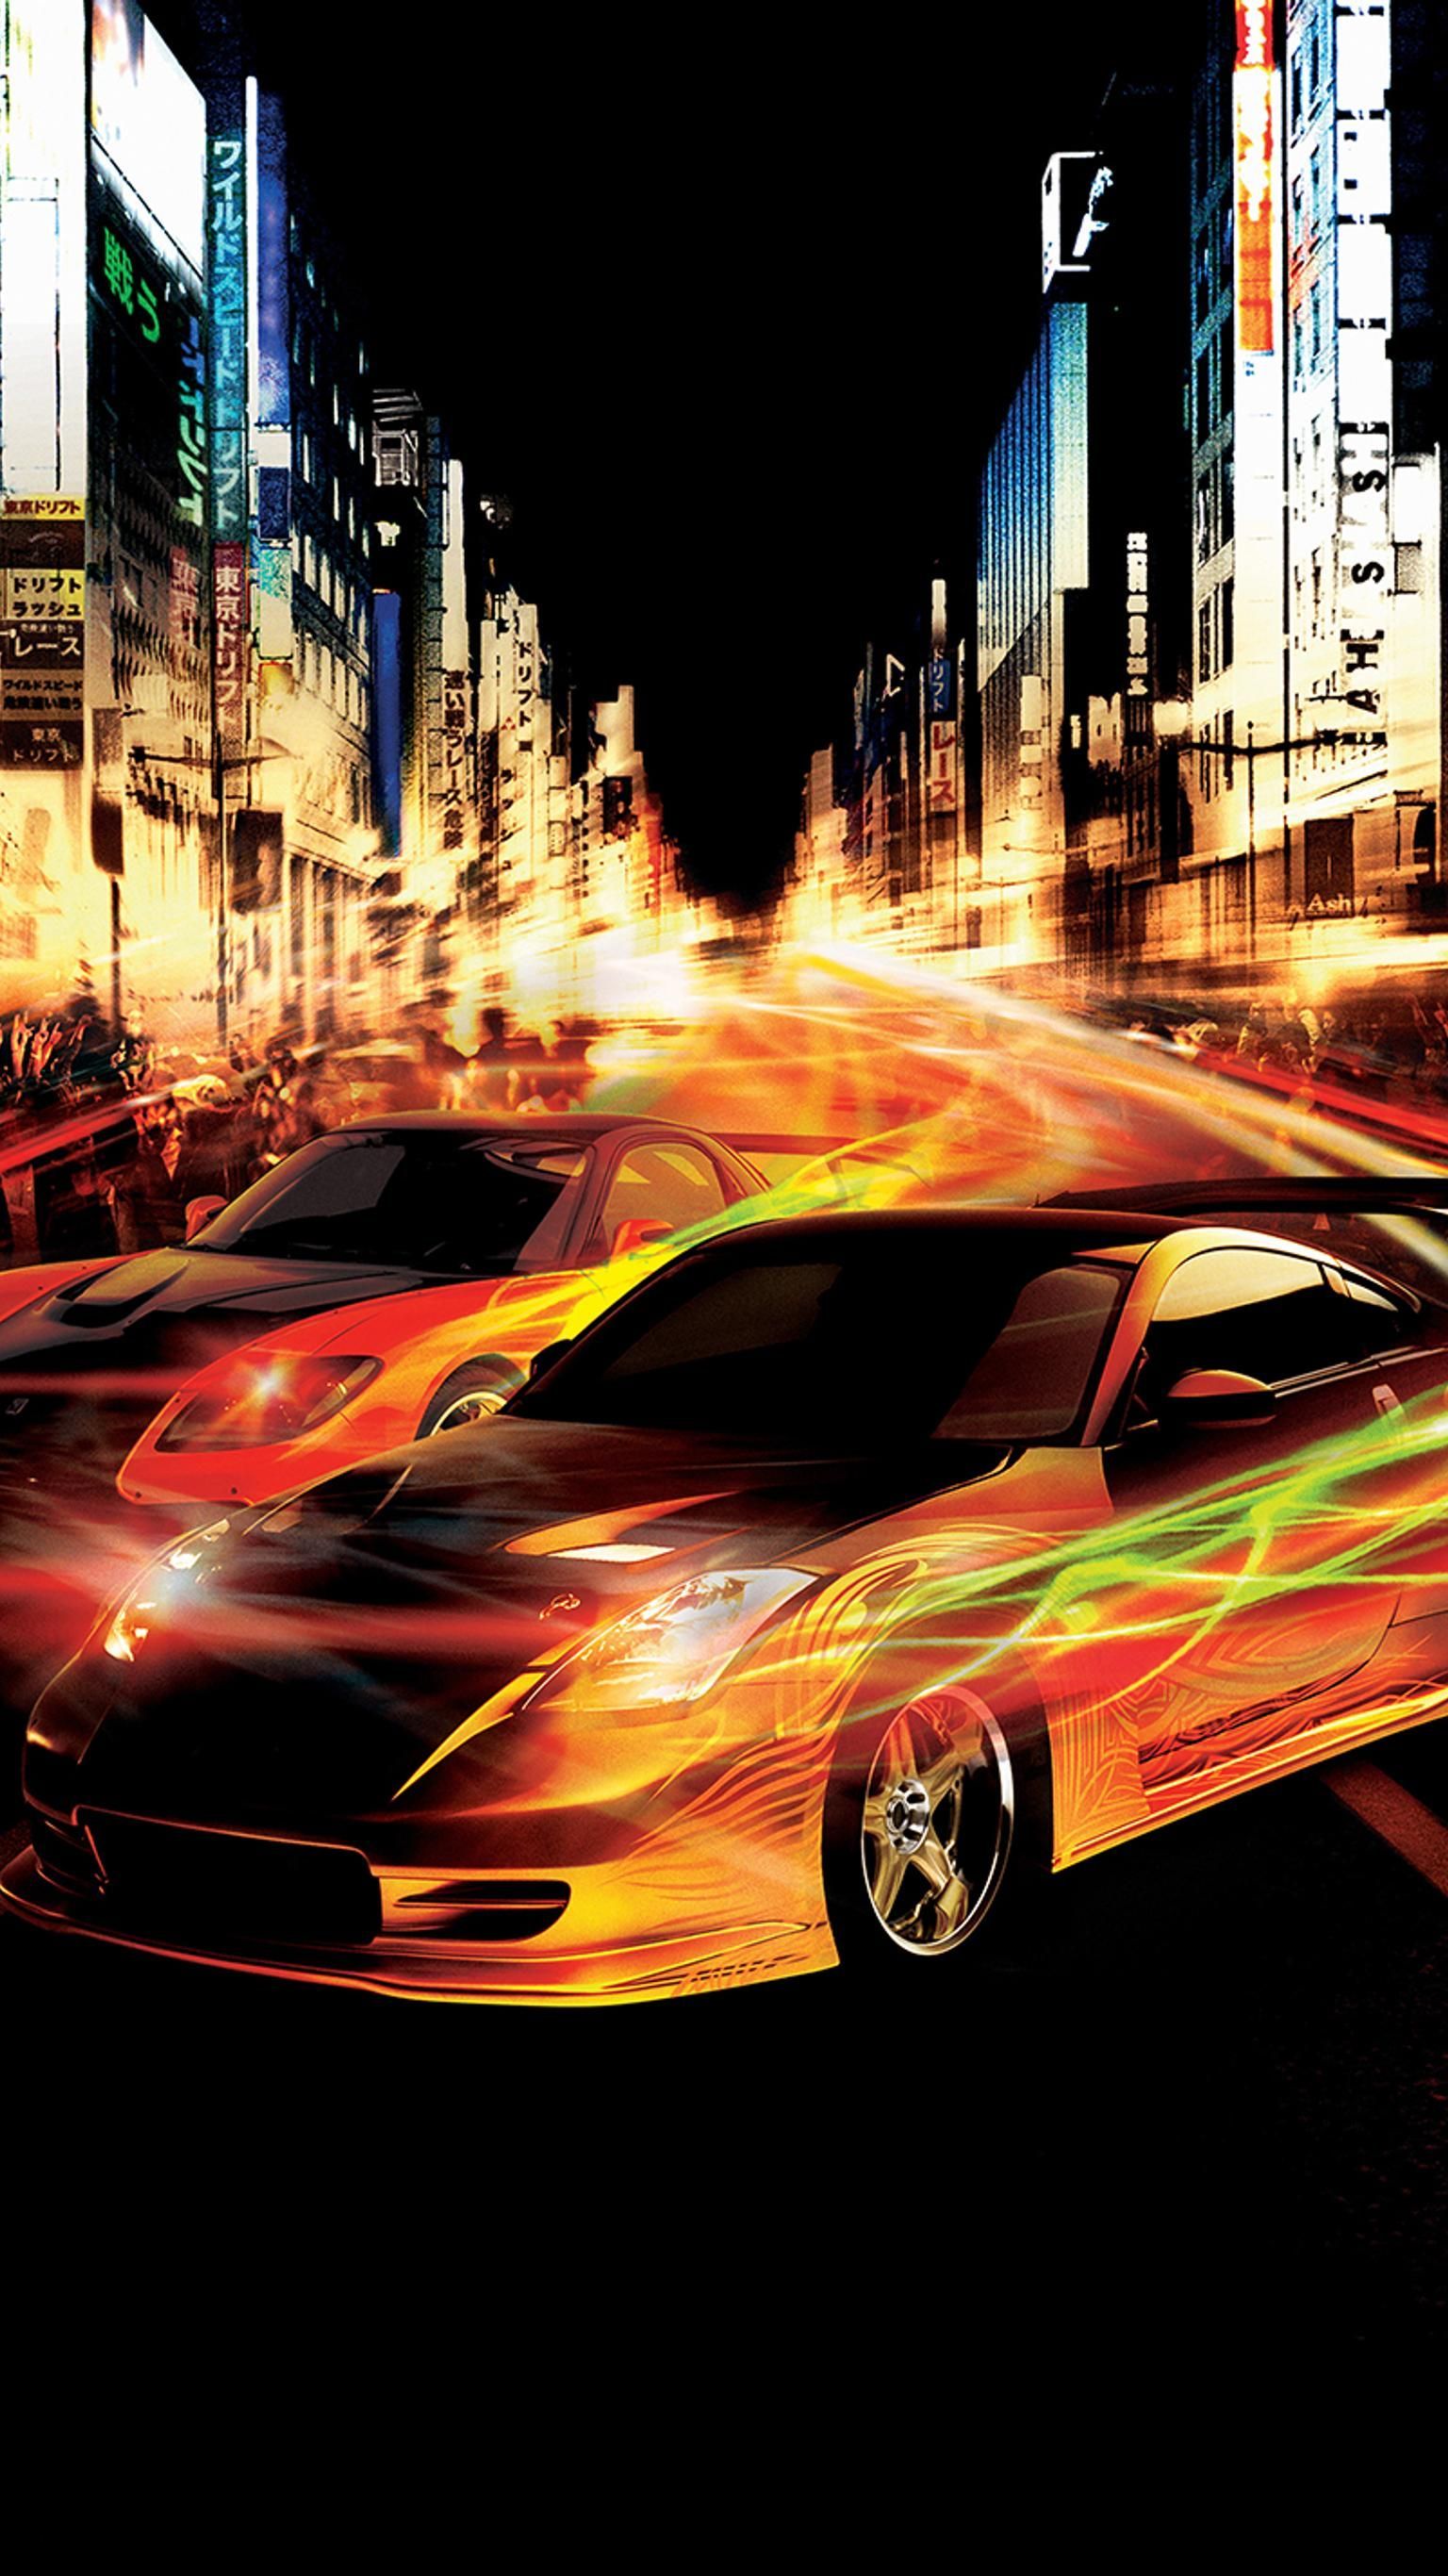 The Fast and the Furious: Tokyo Drift (2006) Phone Wallpaper. Moviemania. Fast and furious, Drift movie, Tokyo drift cars